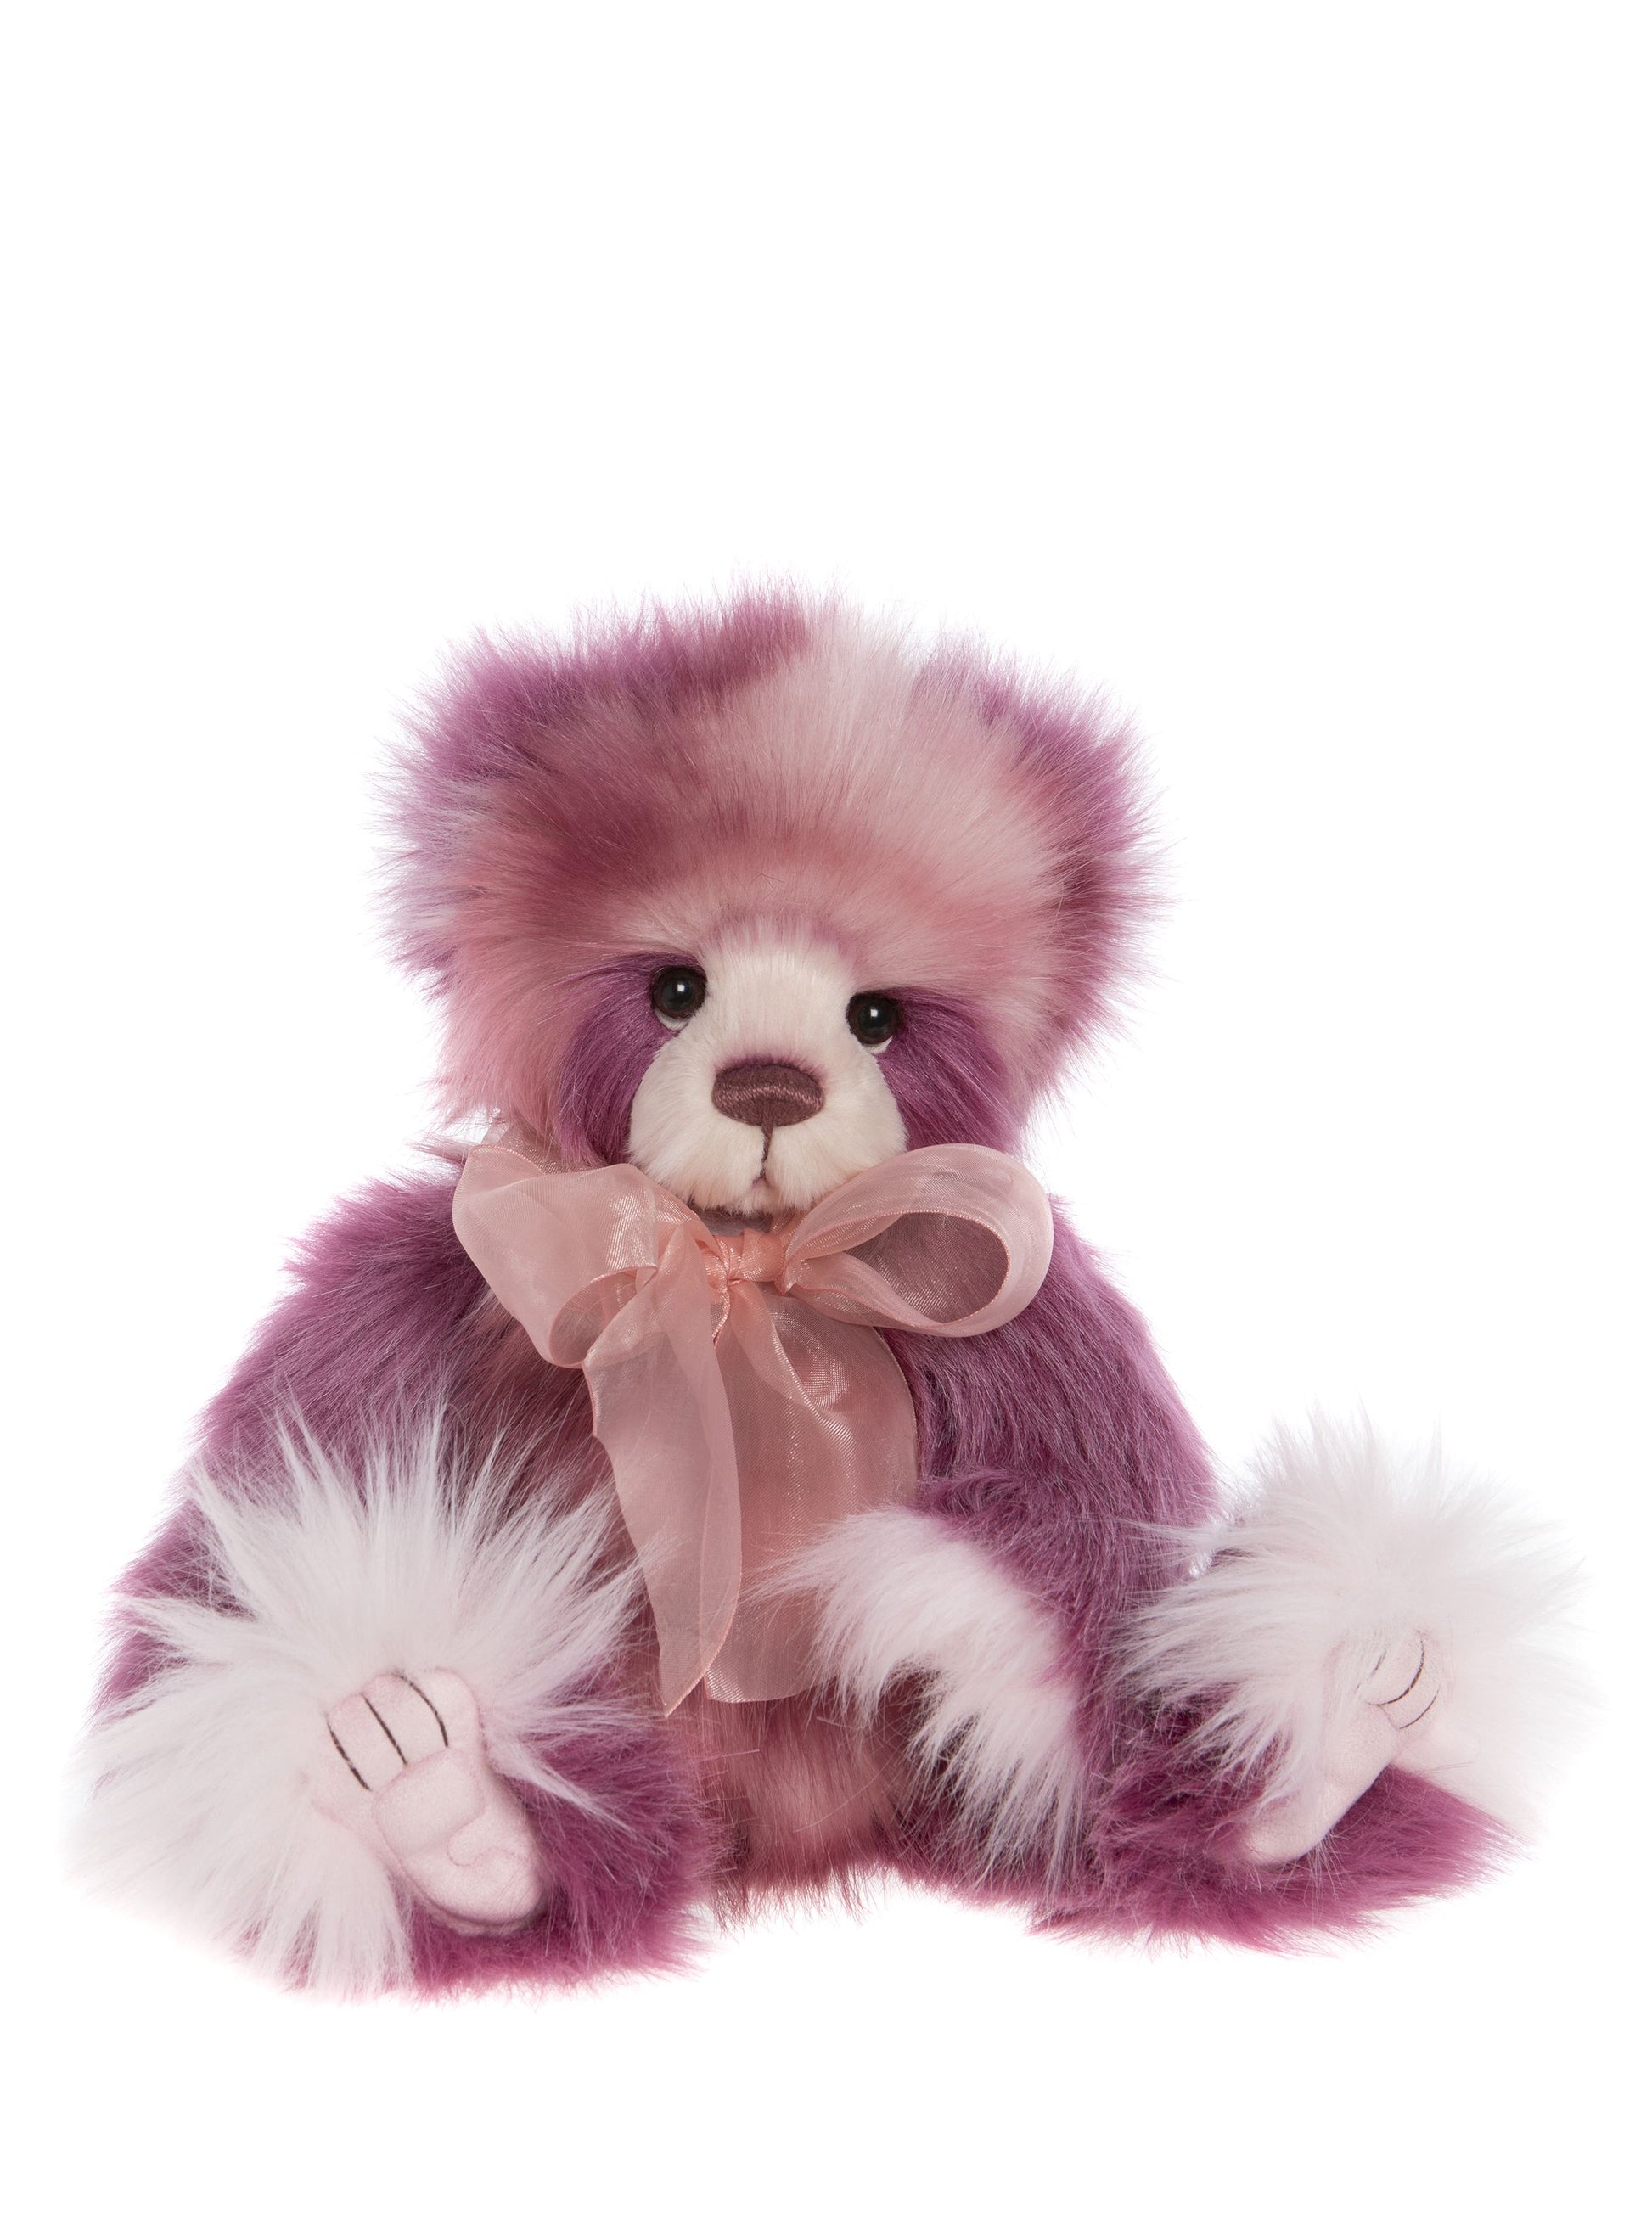 Multi-toned purple and white Charlie Bear with a big bow